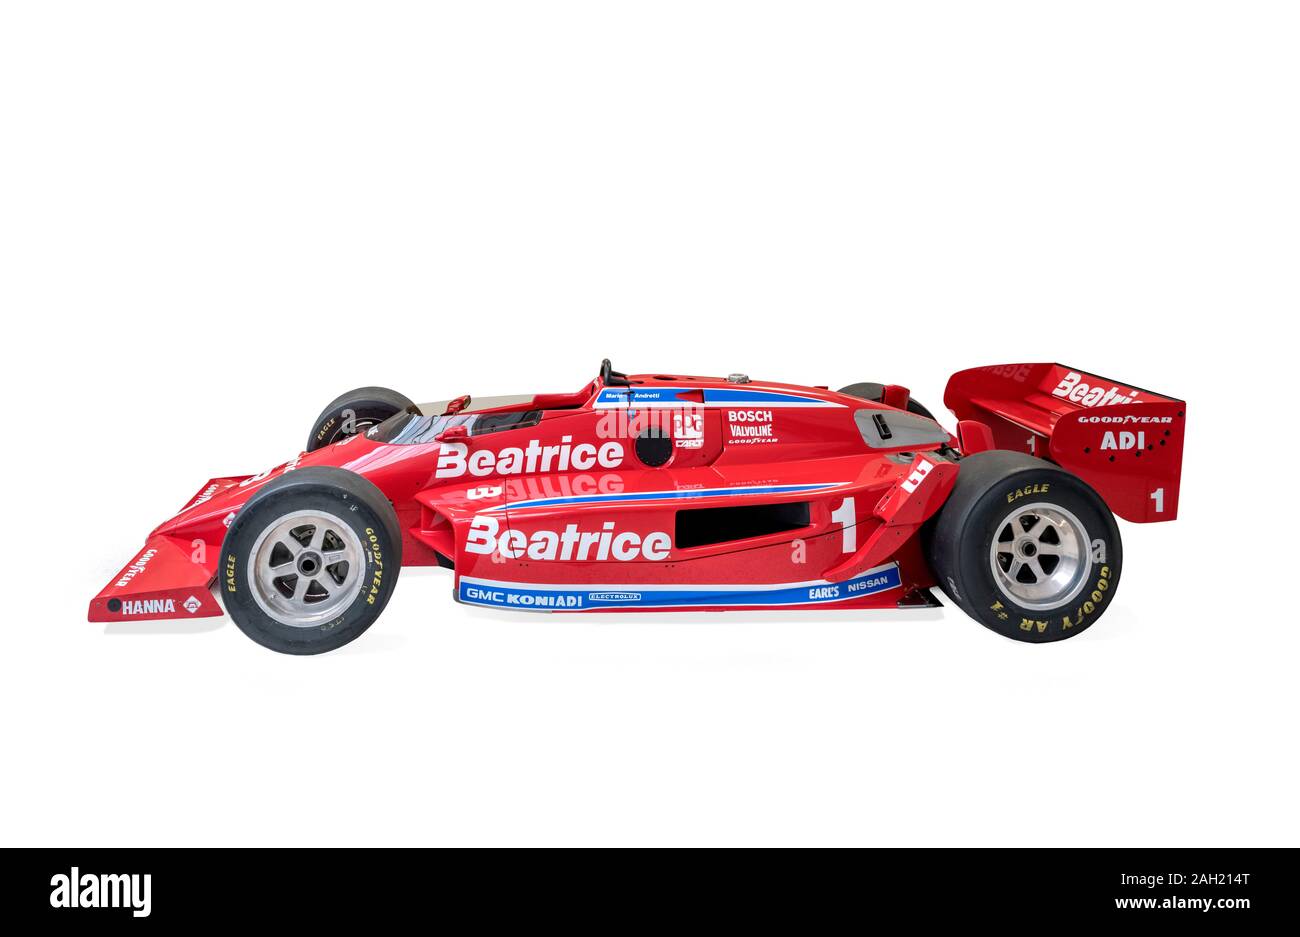 Newman/Haas Lola T900, in which Mario Andretti came 2nd in the 1985 Indianapolis 500 race, Indianapolis Motor Speedway Museum, Indianapolis, USA Stock Photo